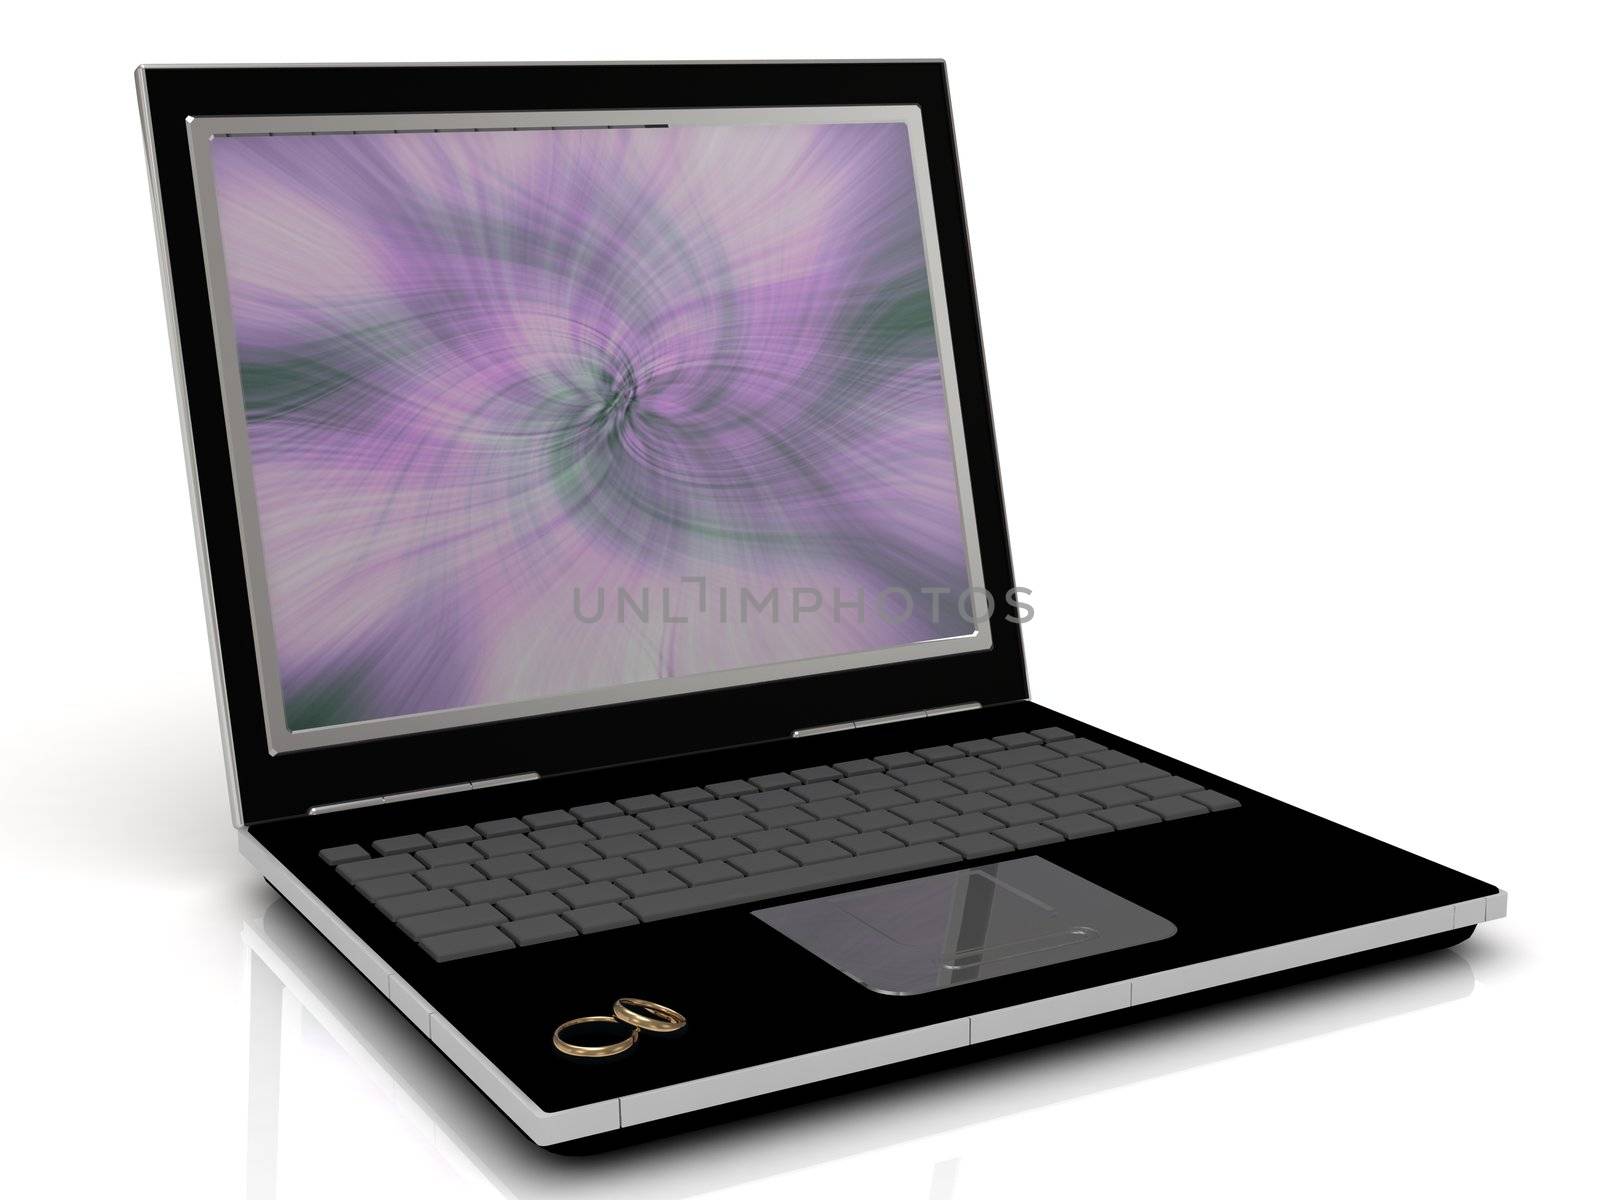 Dating on the Internet: rings on a laptop by GreenMost